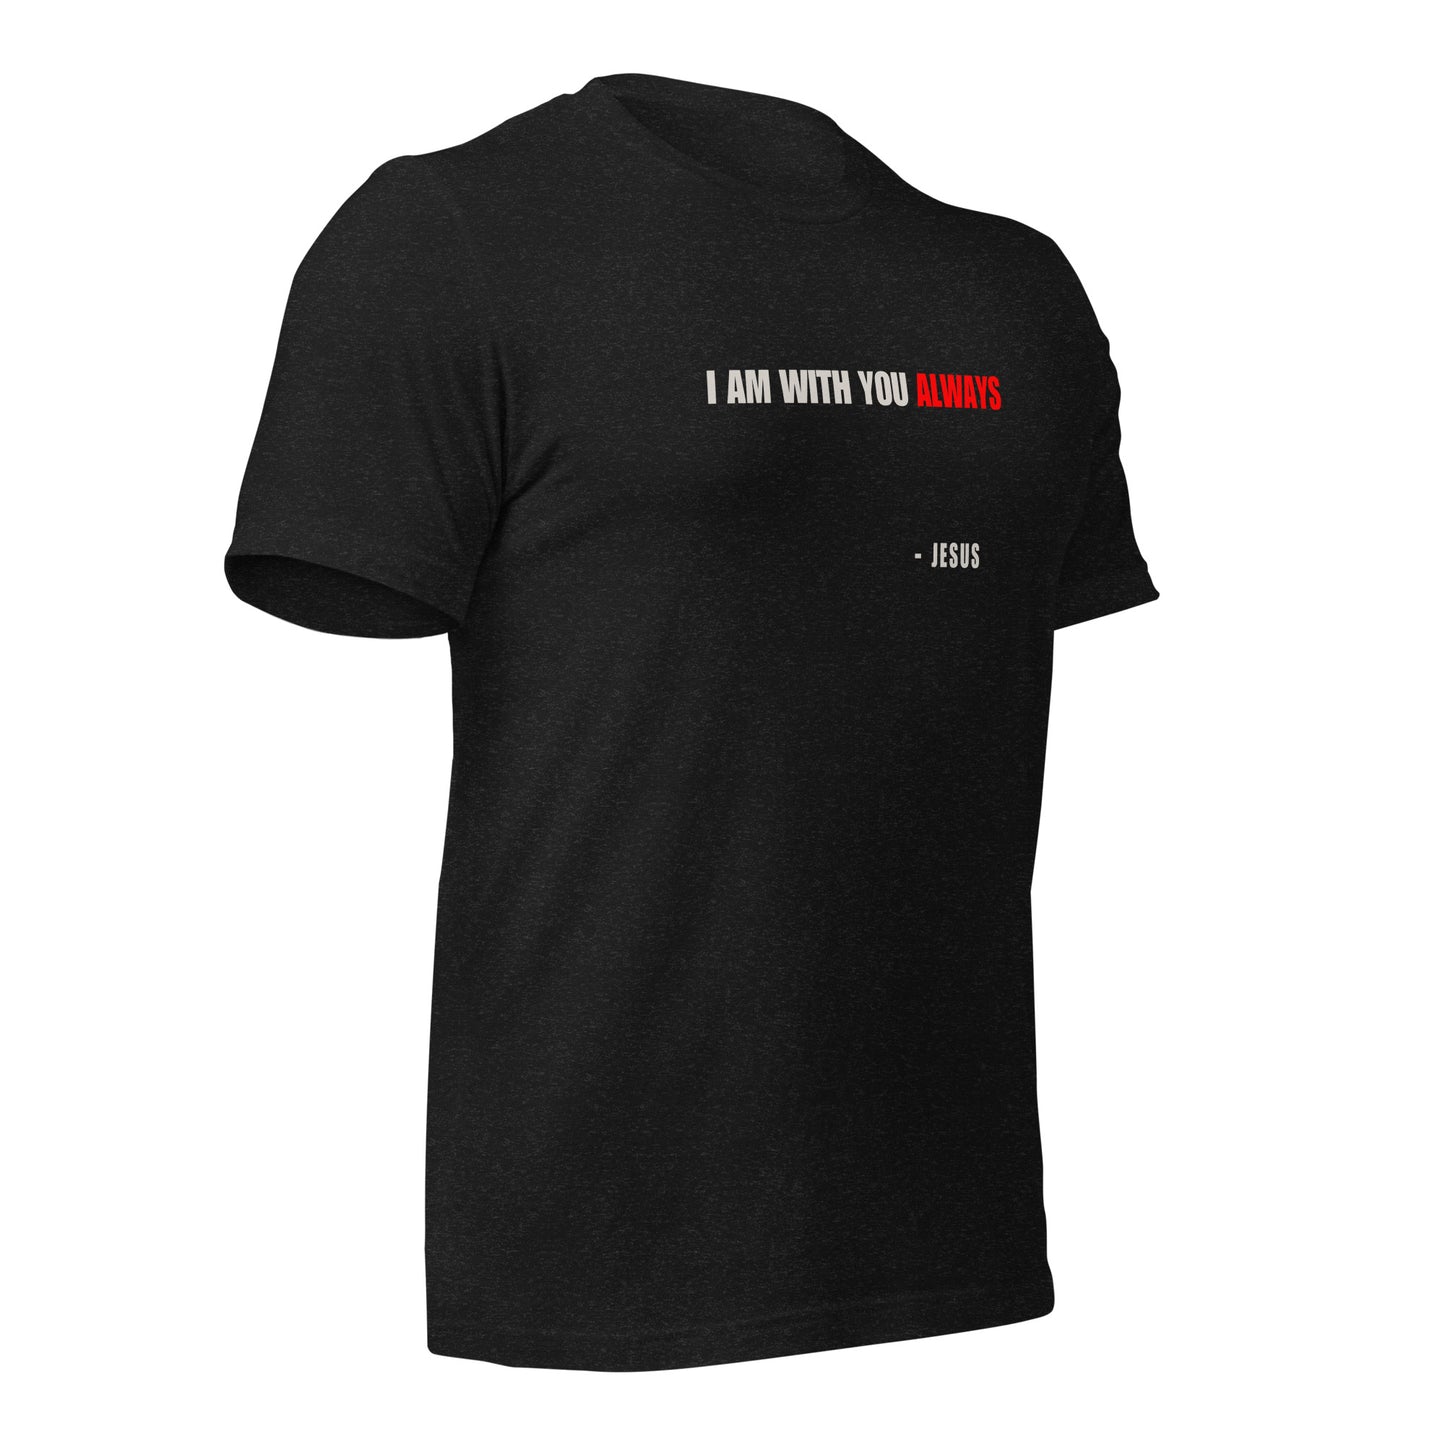 "I am with you" Unisex T-shirt